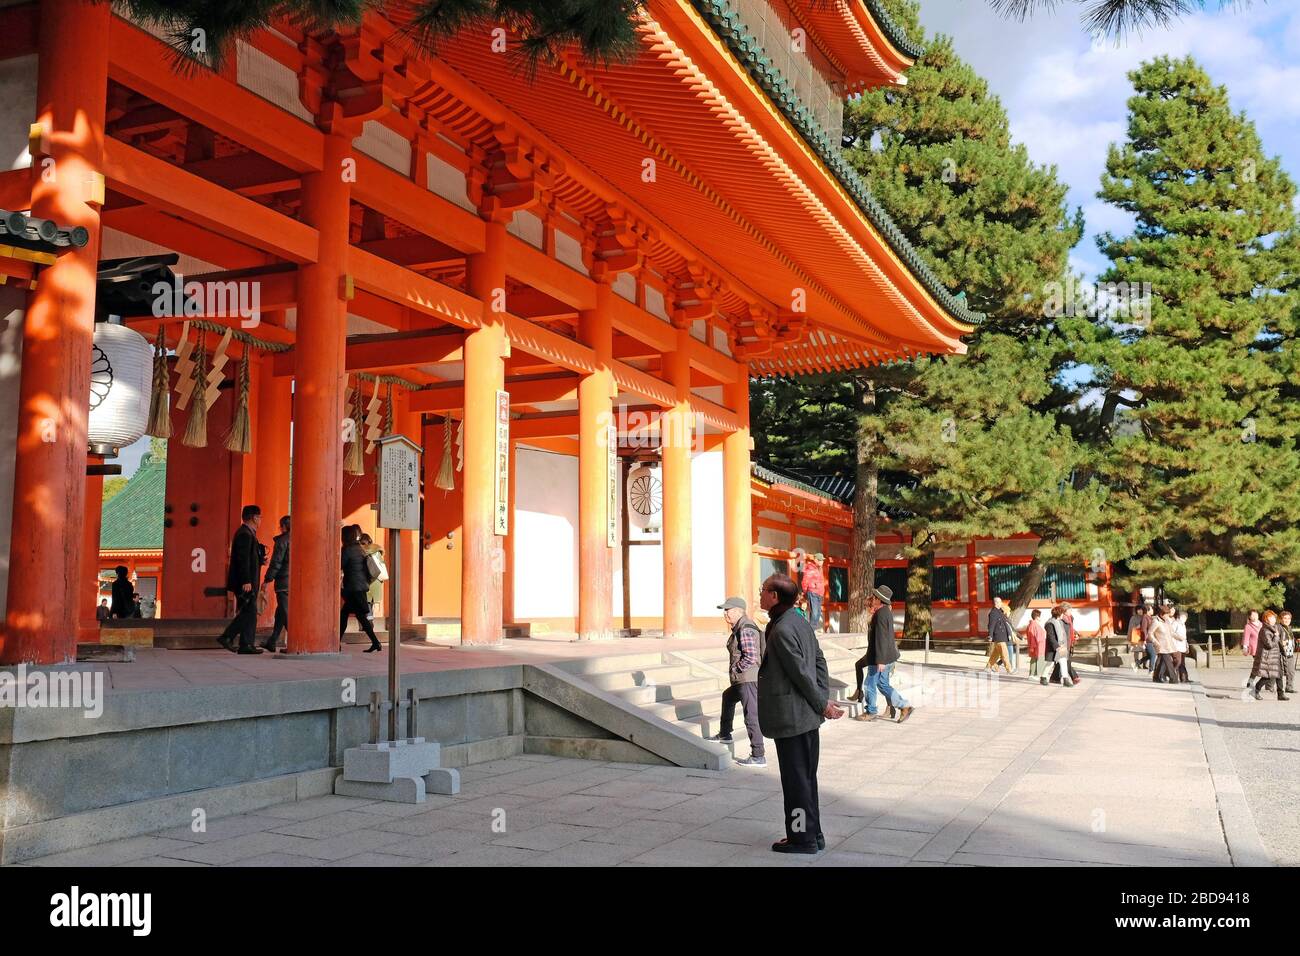 Heian Jingu shrine was built in 1895.  A man stands and ponders outside the Otenman gate entrance at this Kyoto, Japan attraction. Stock Photo